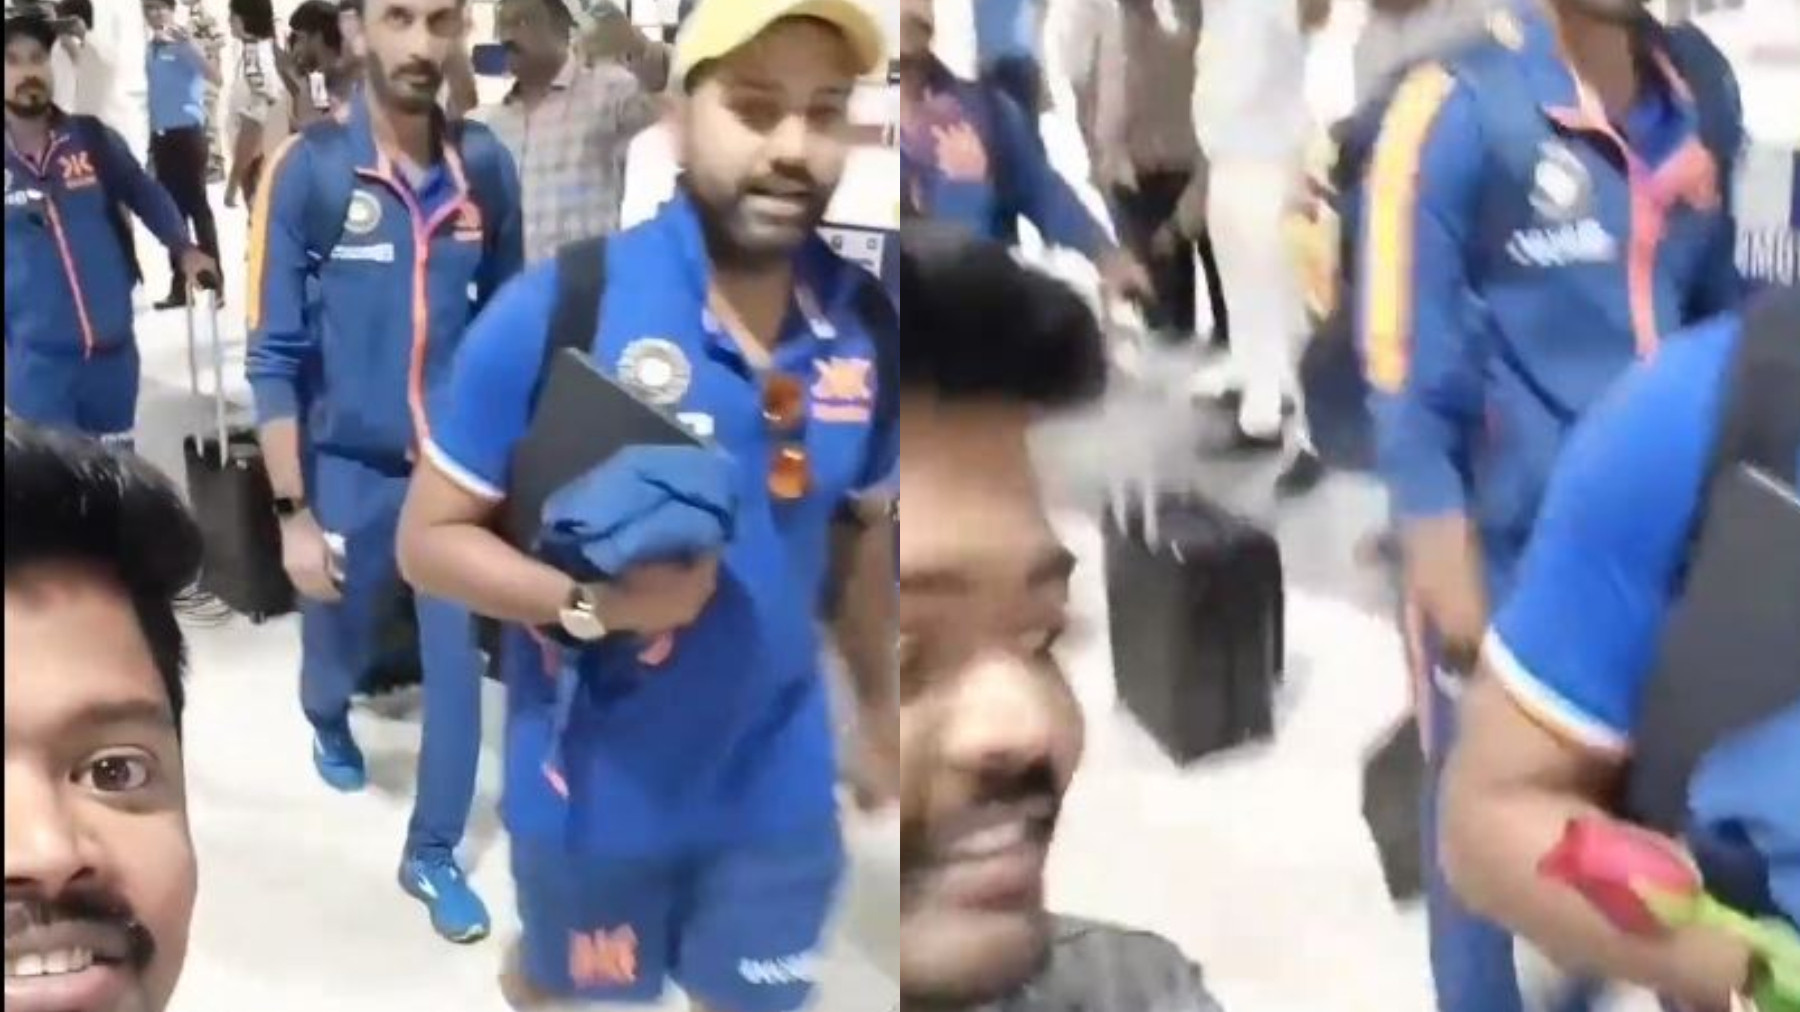 IND v AUS 2023: WATCH- Rohit Sharma gives red rose to a fan, asks “Will you marry me?”